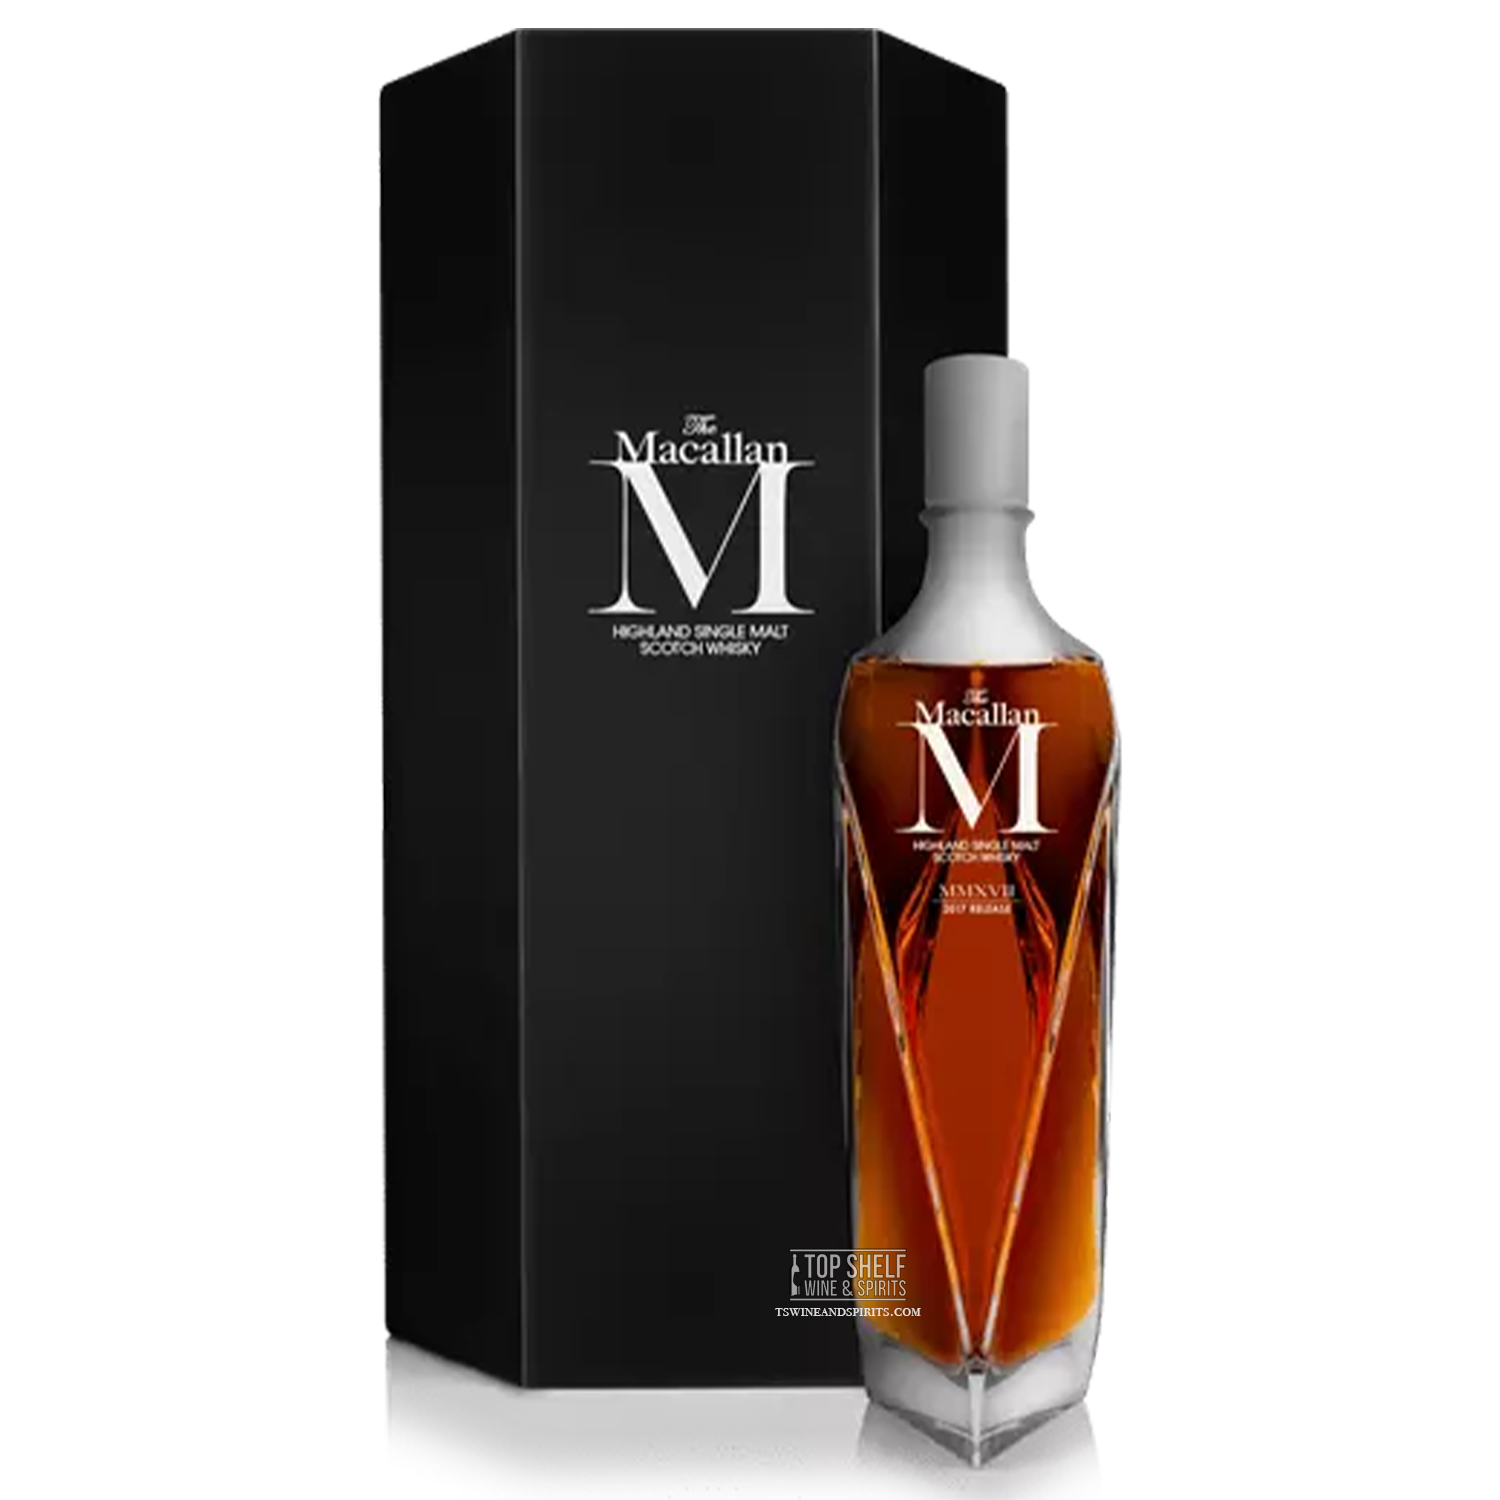 The World's Best Scotch Experiences presented by Macallan